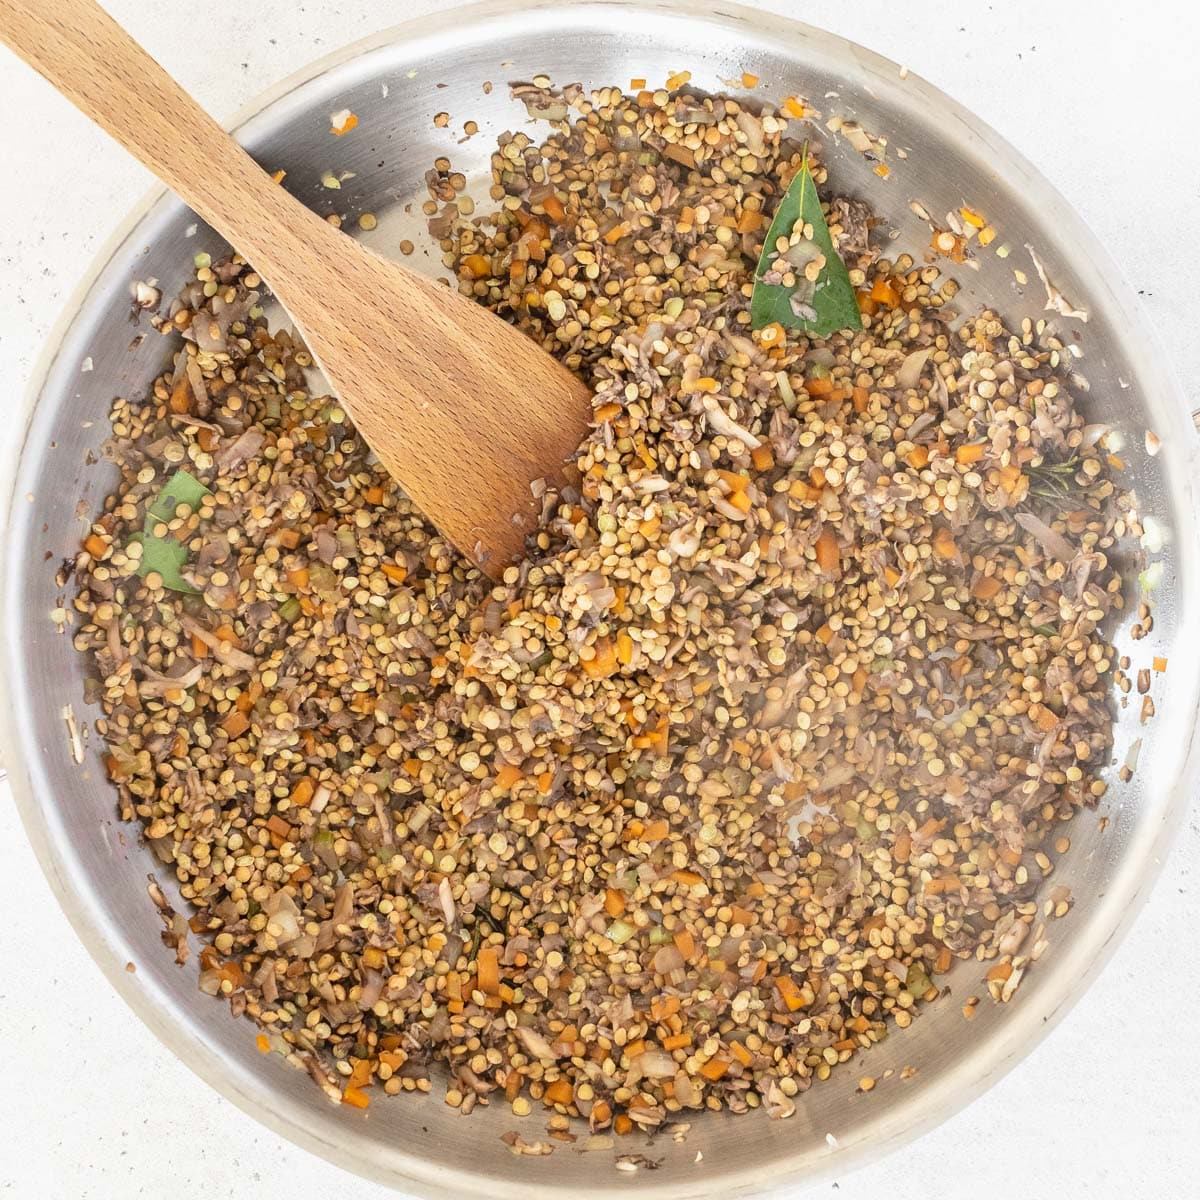 lentils added to the pan